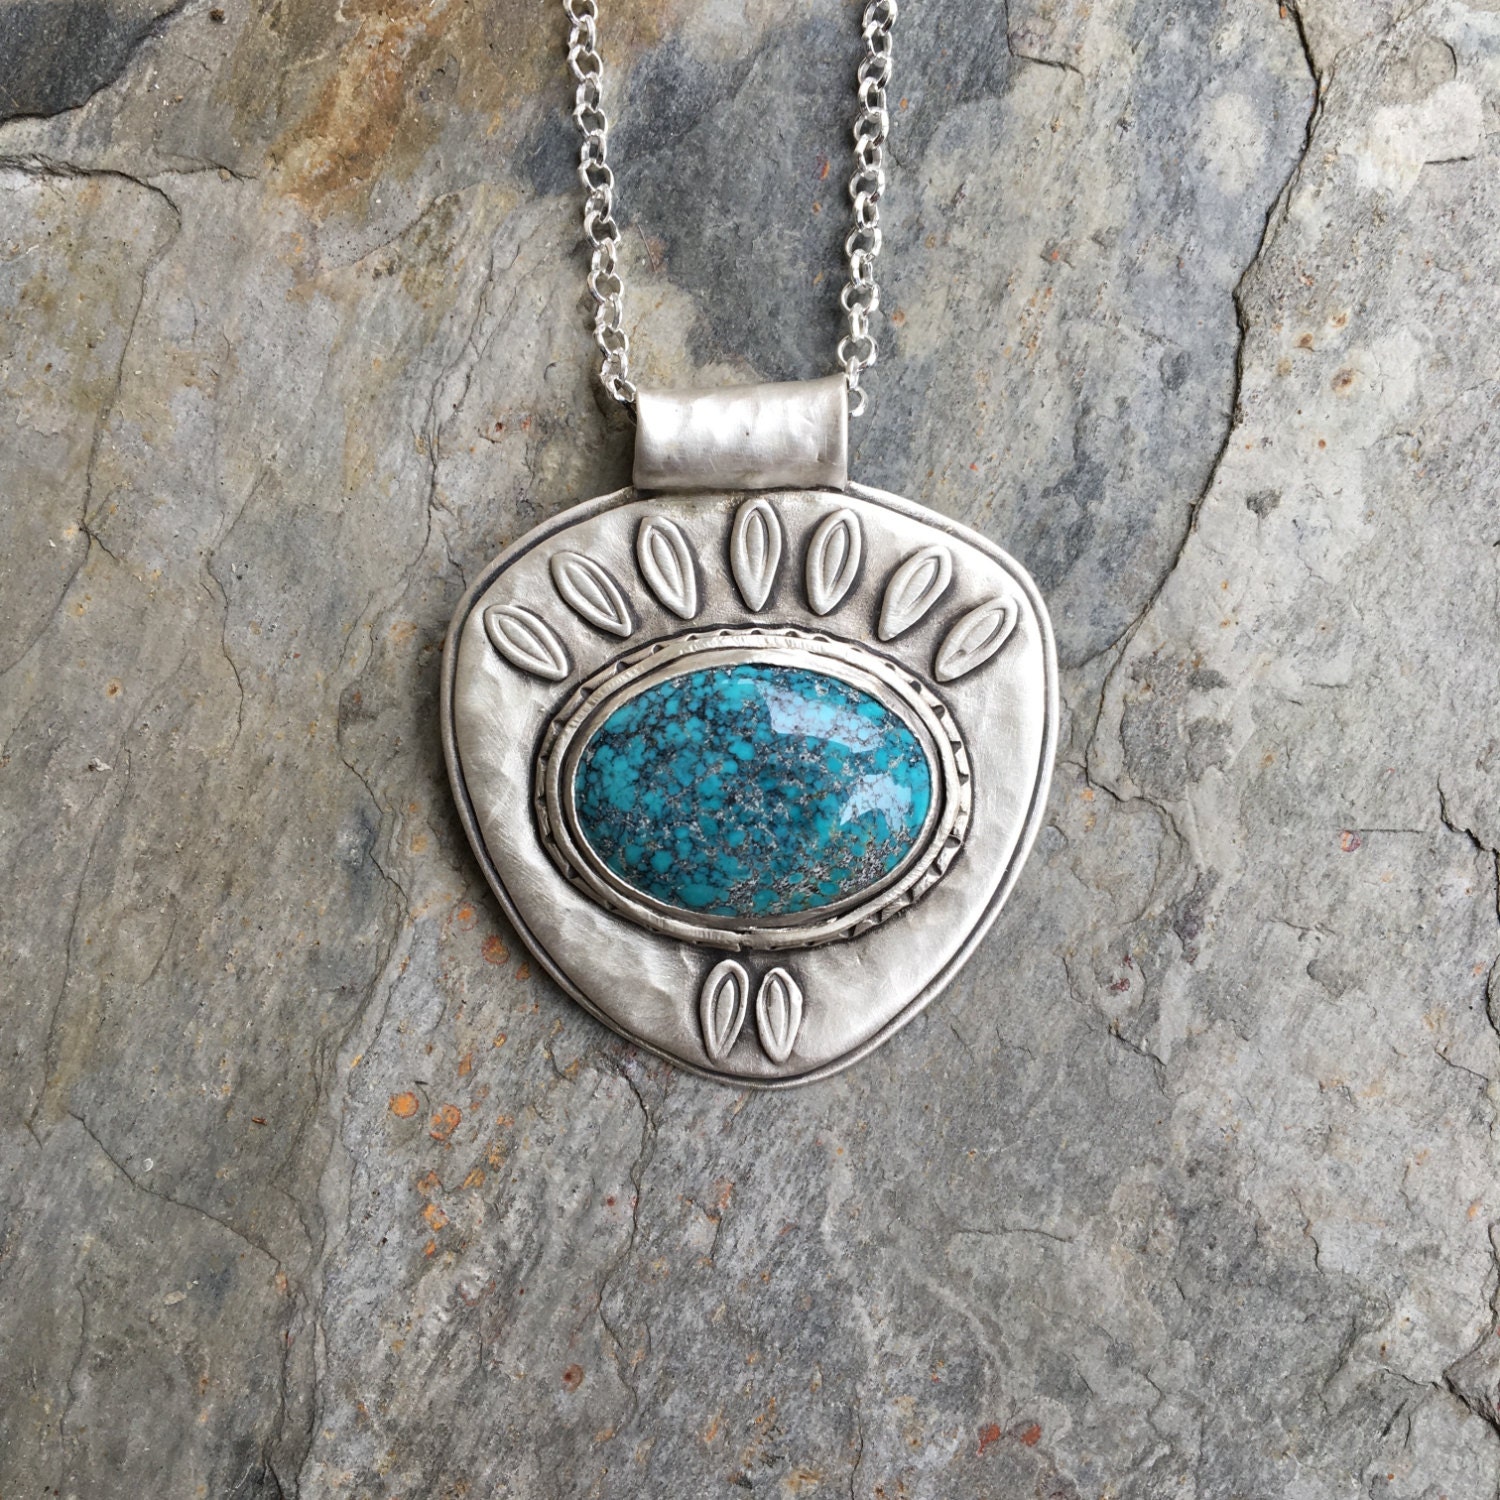 Turquoise Necklace in Sterling Silver. Designer Cabochon